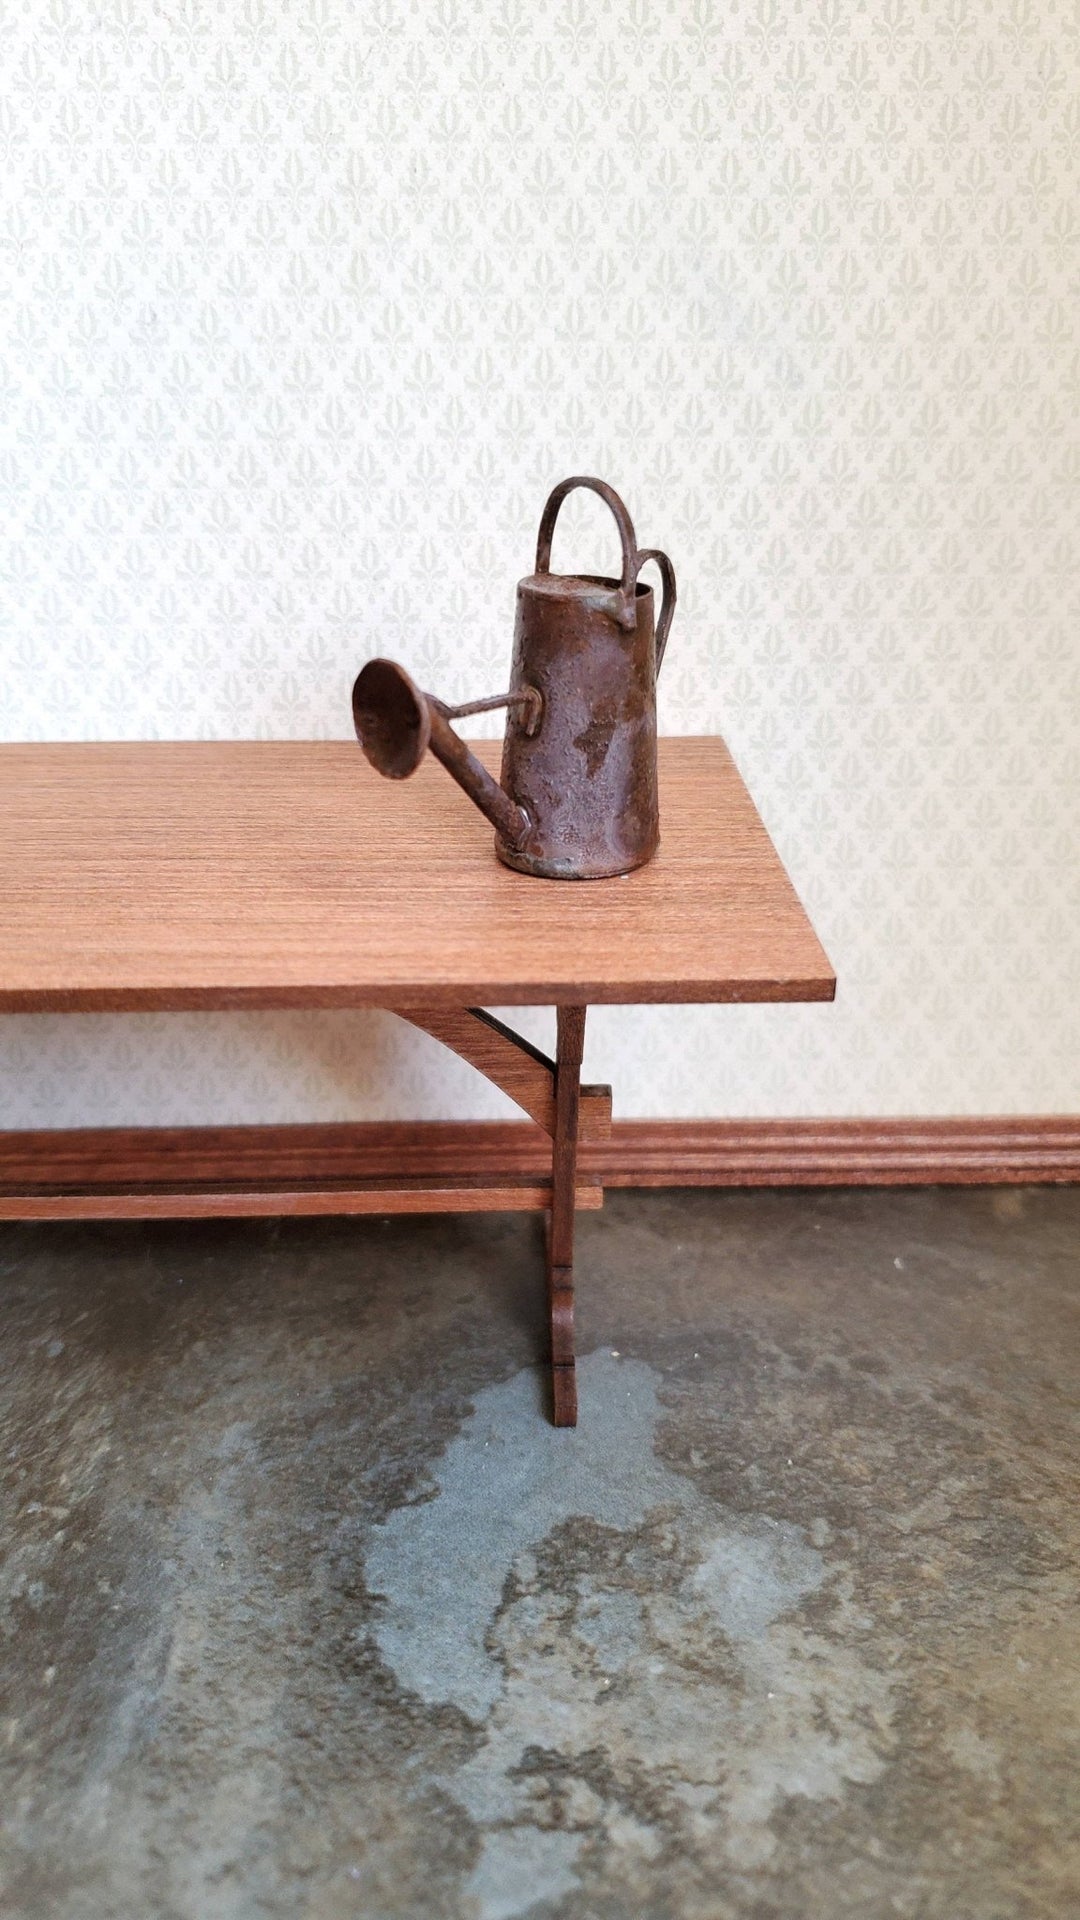 Dollhouse Miniature Metal Watering Can with Handle Rusted Aged 1:12 Scale Garden - Miniature Crush